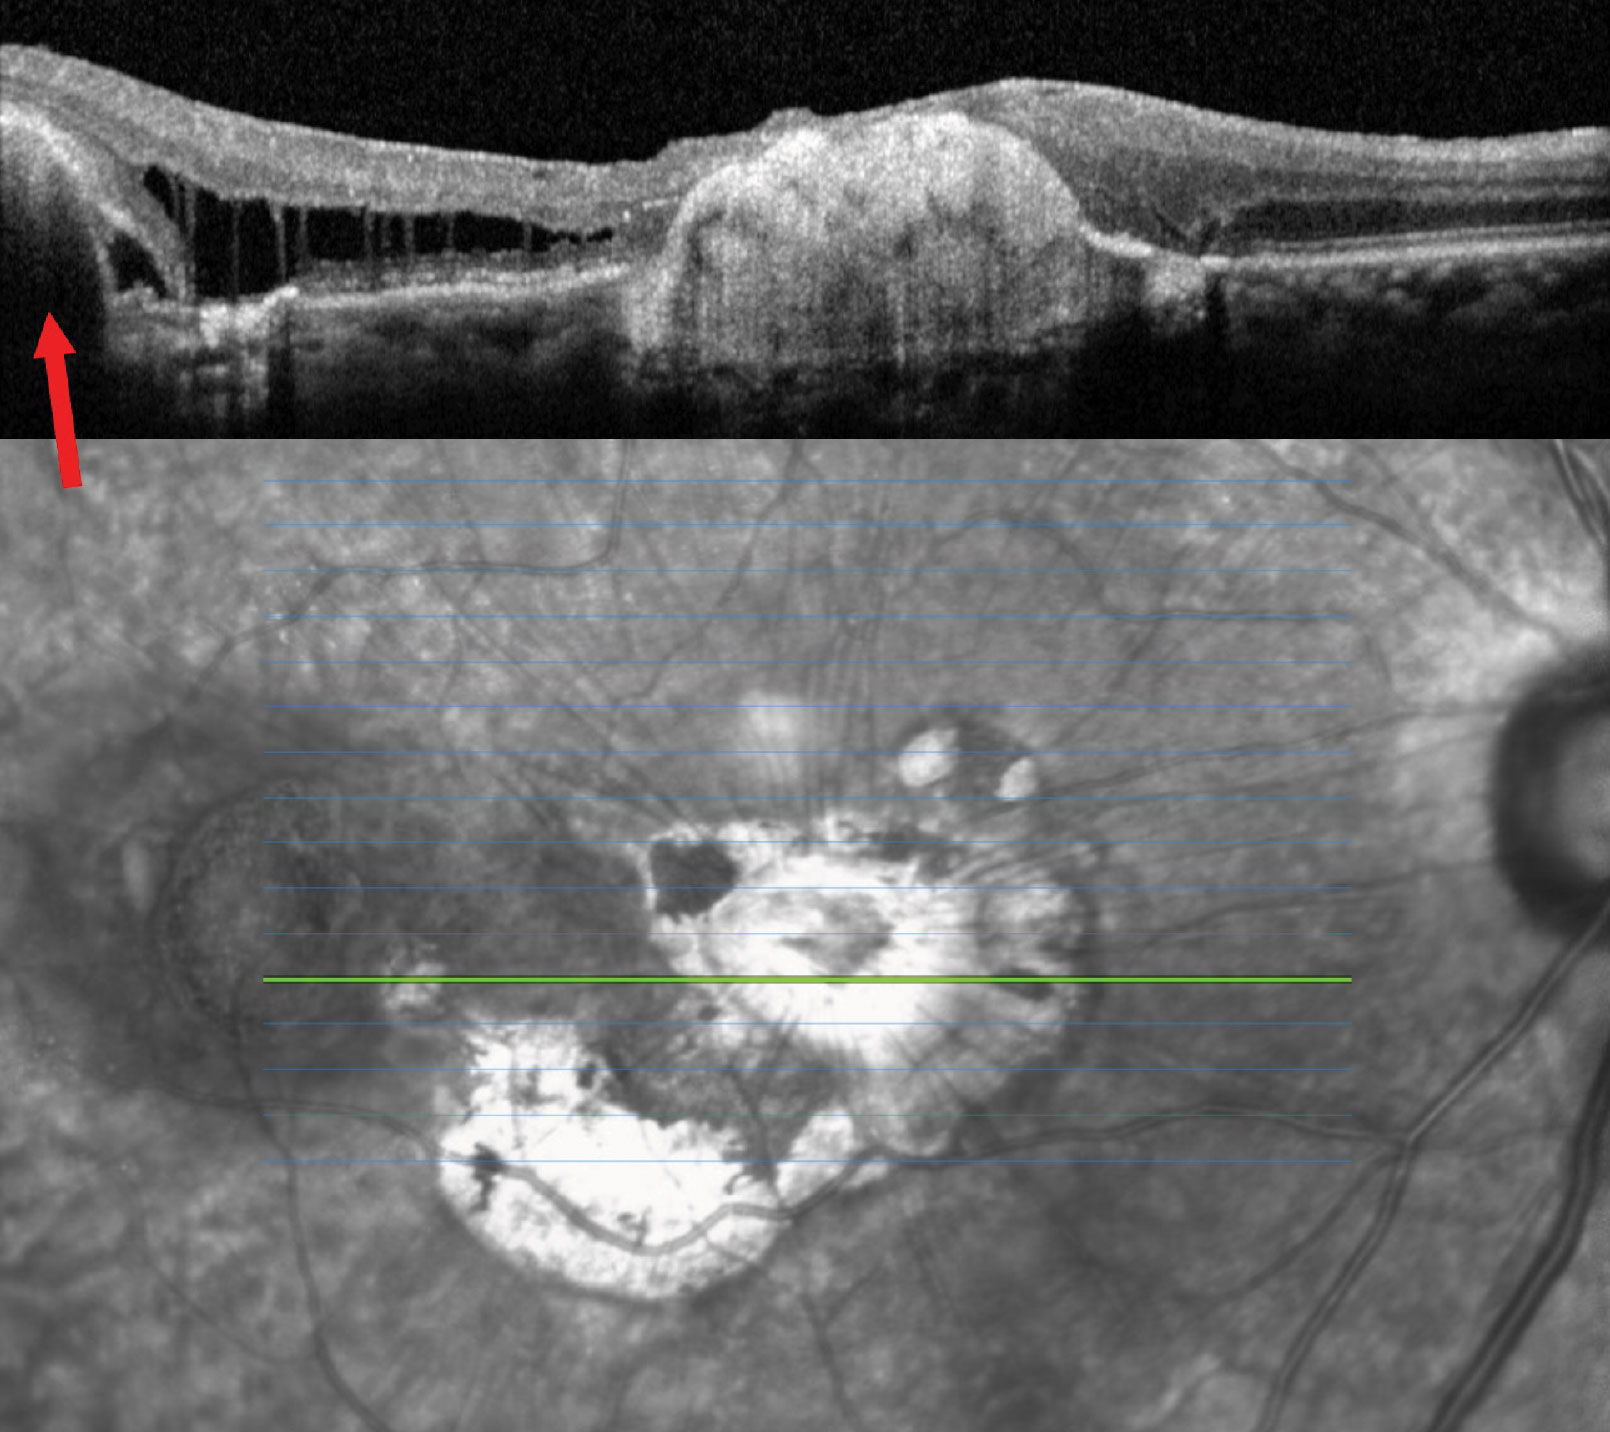 OCT of the right eye. What could the area of RPE elevation possibly correspond to?